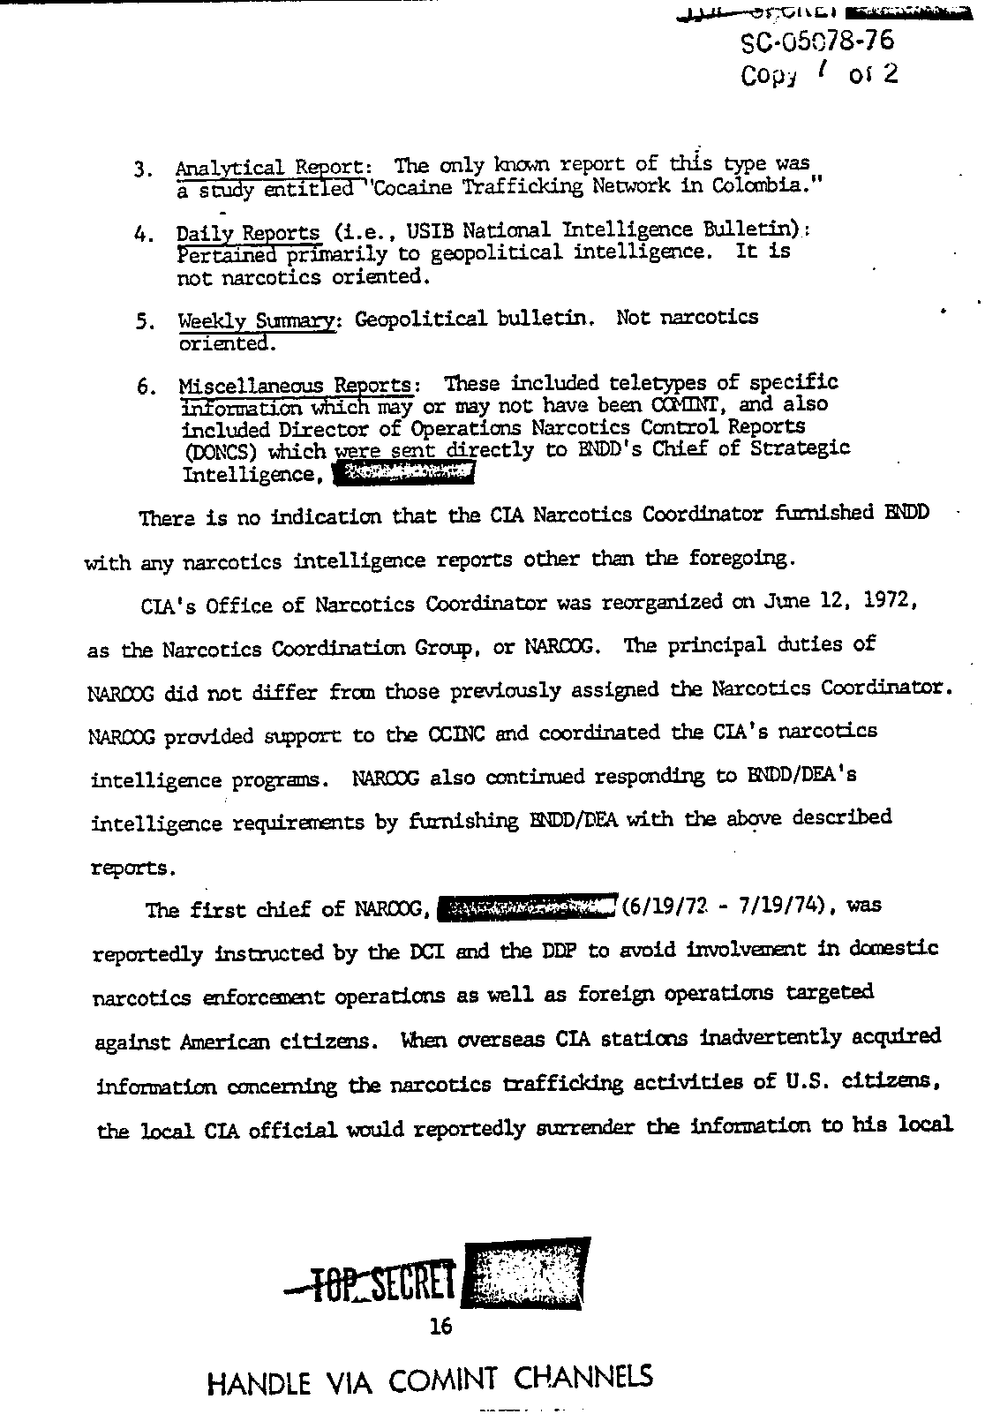 Page 24 from Report on Inquiry Into CIA Related Electronic Surveillance Activities